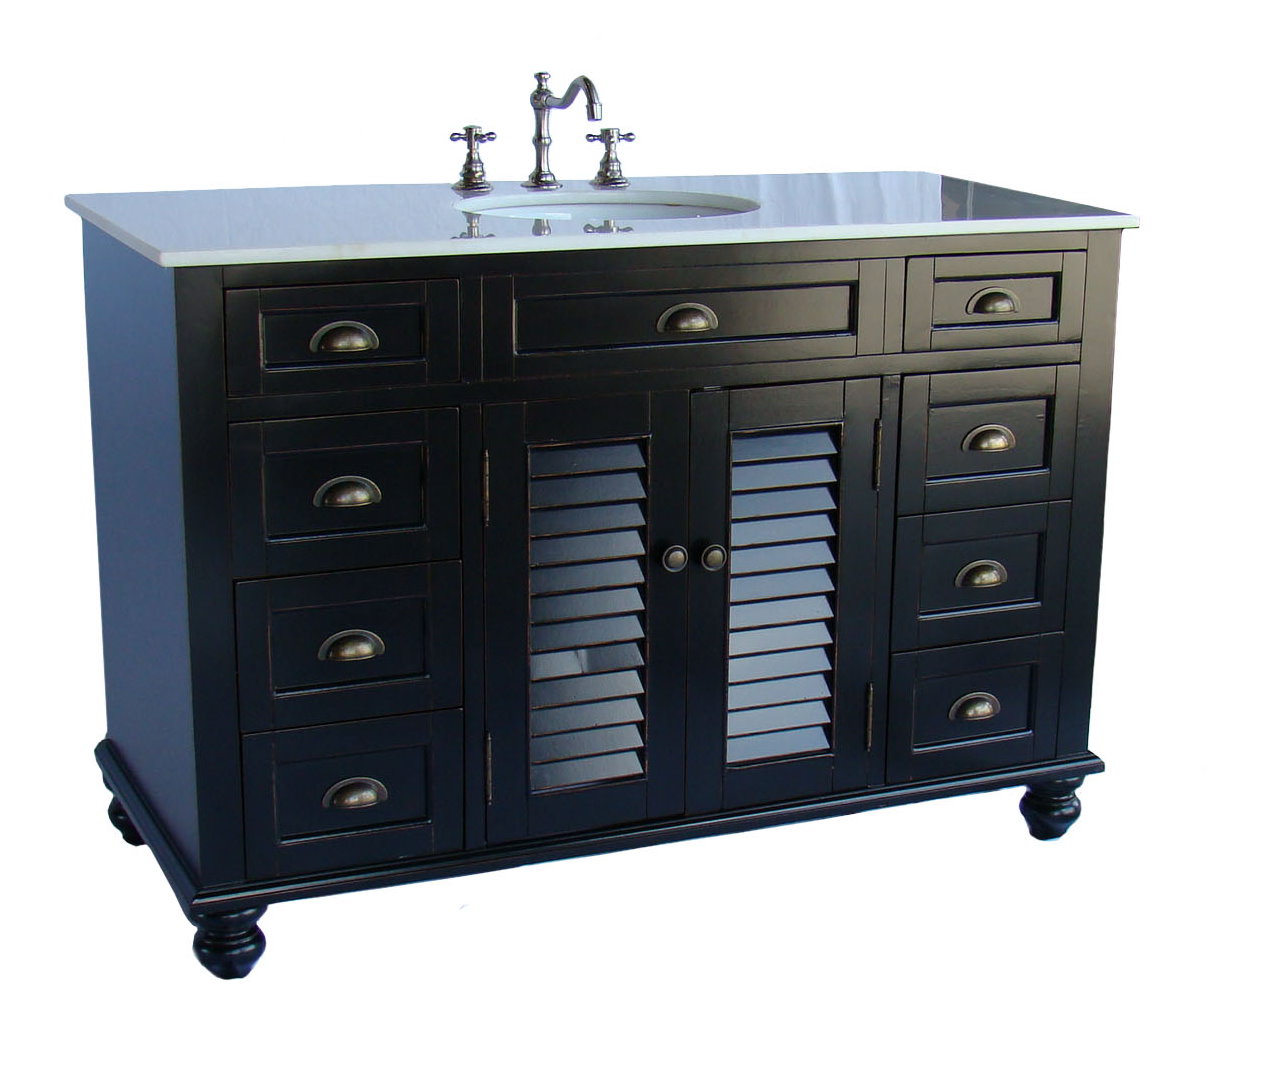 48" Cottage Style Single Sink Bathroom Vanity with White Marble Countertop